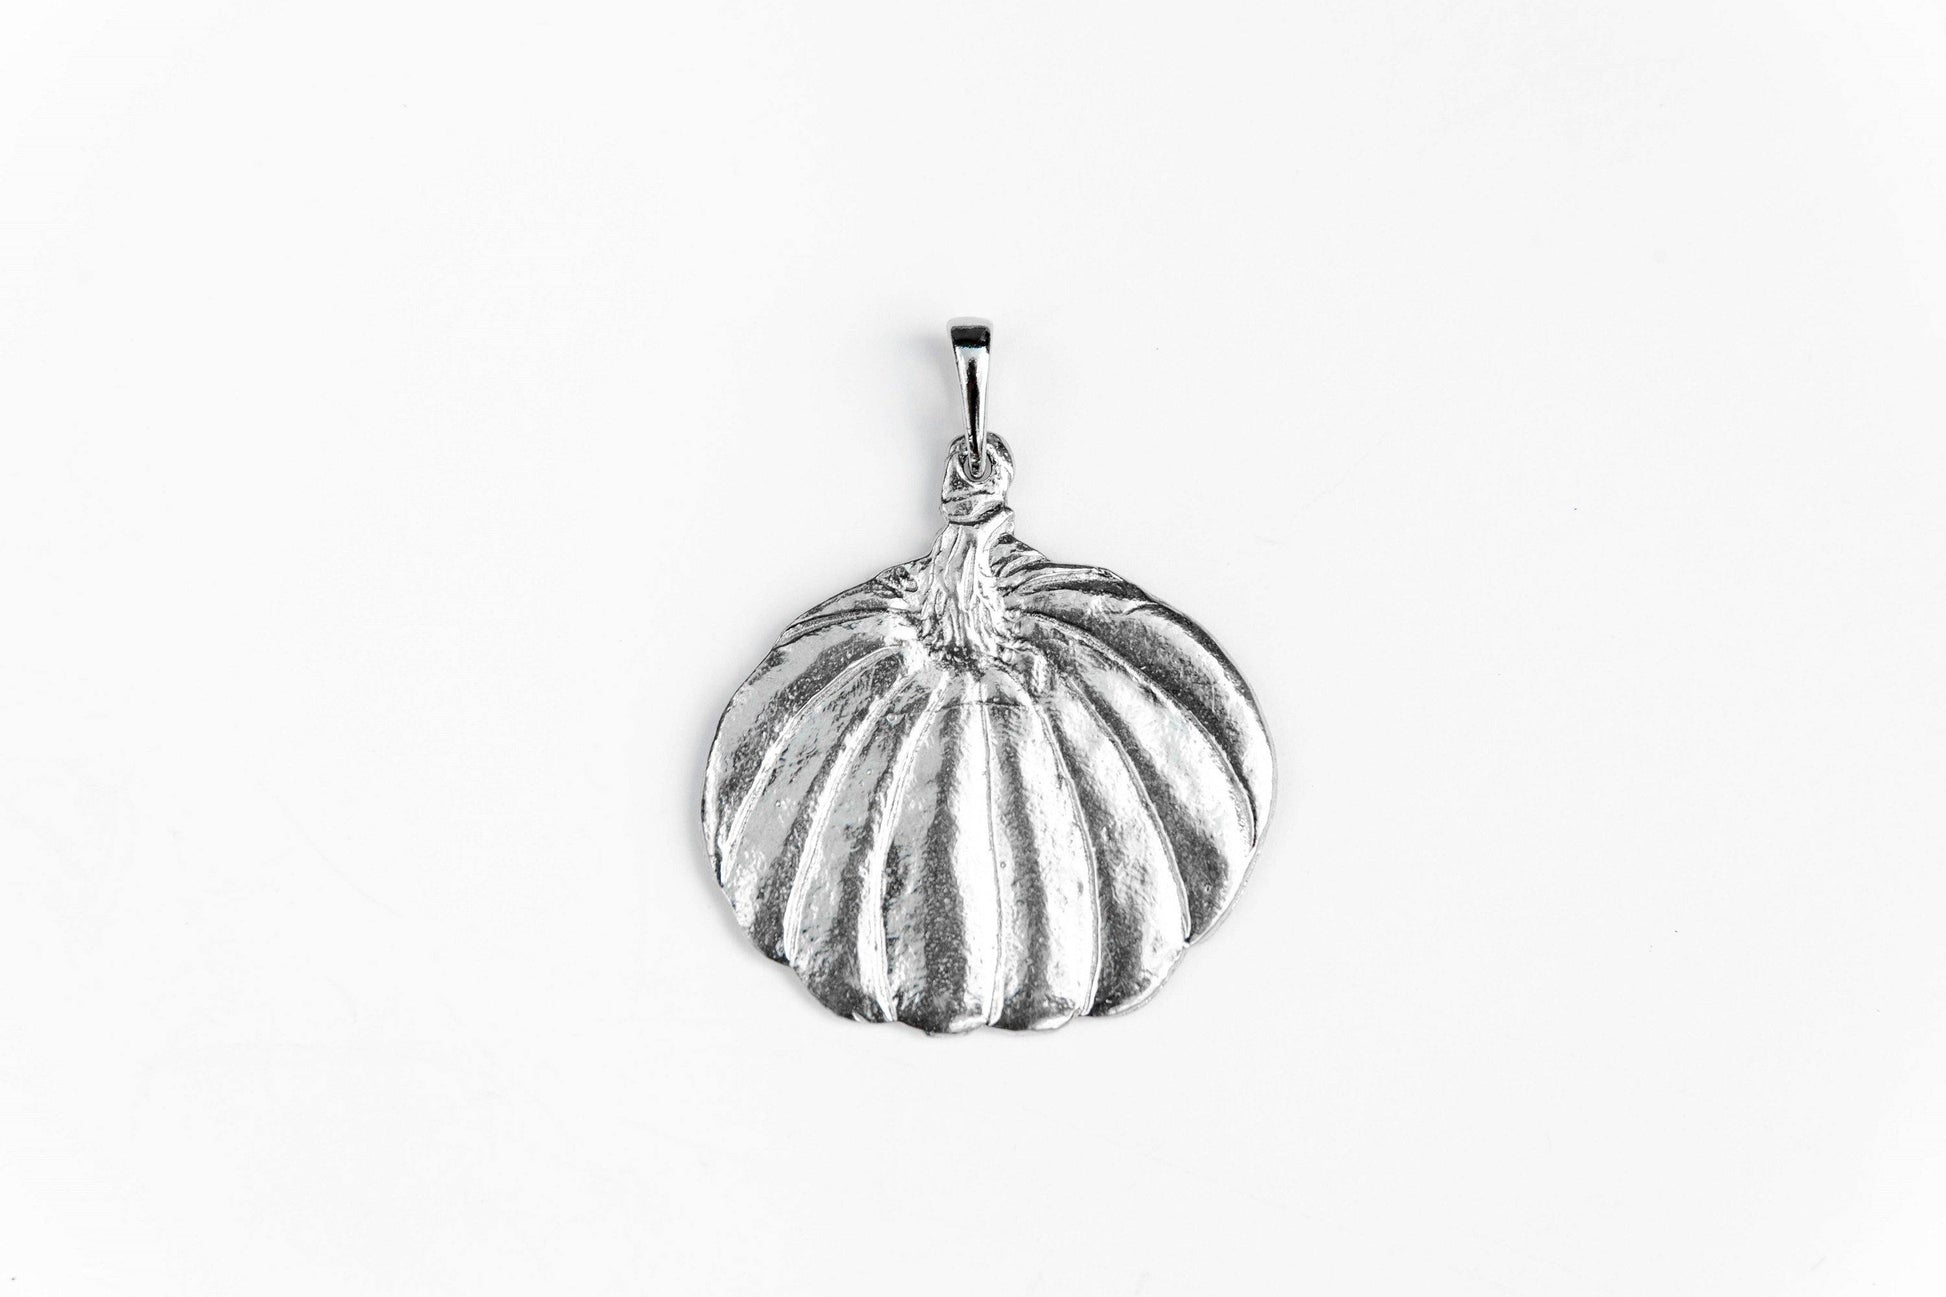 Handmade Large Pumpkin Fall Halloween Thanksgiving Jewelry Accessories Pendant Charm Necklace Pewter - House of Morgan Pewter